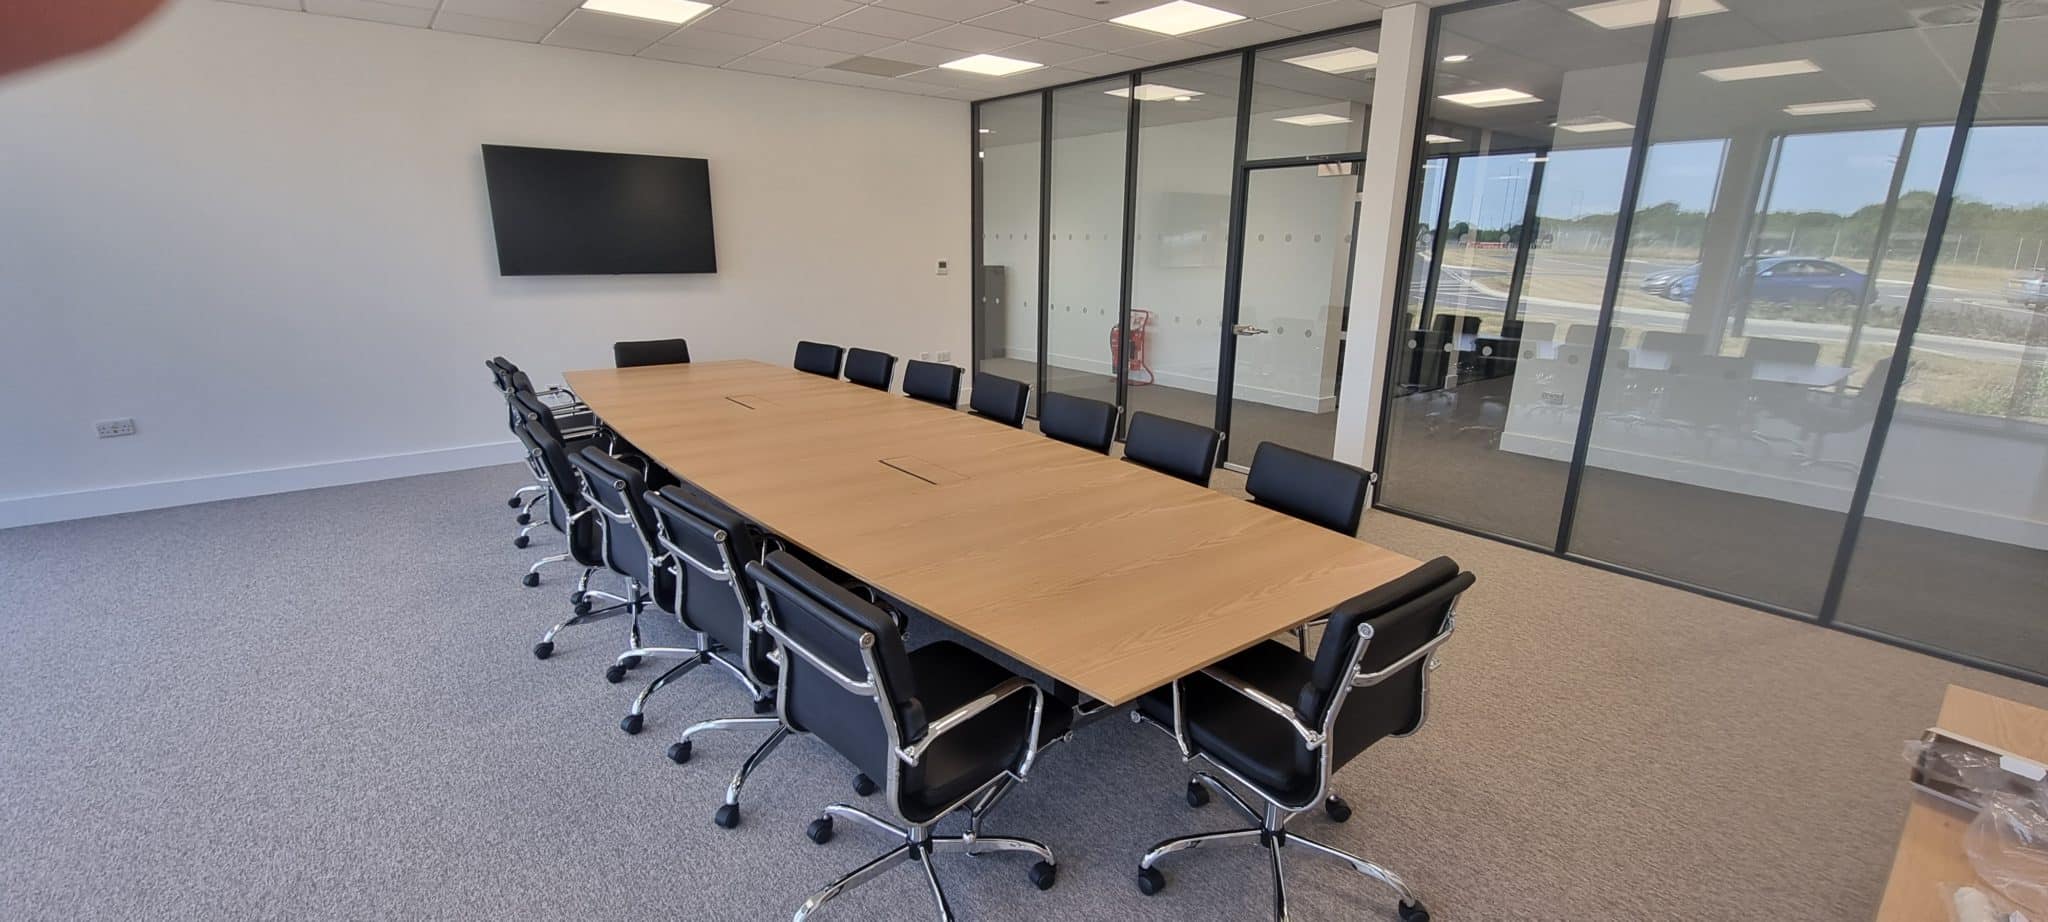 5000 x 1500 Veneer Meeting table with integrated power and premium seating